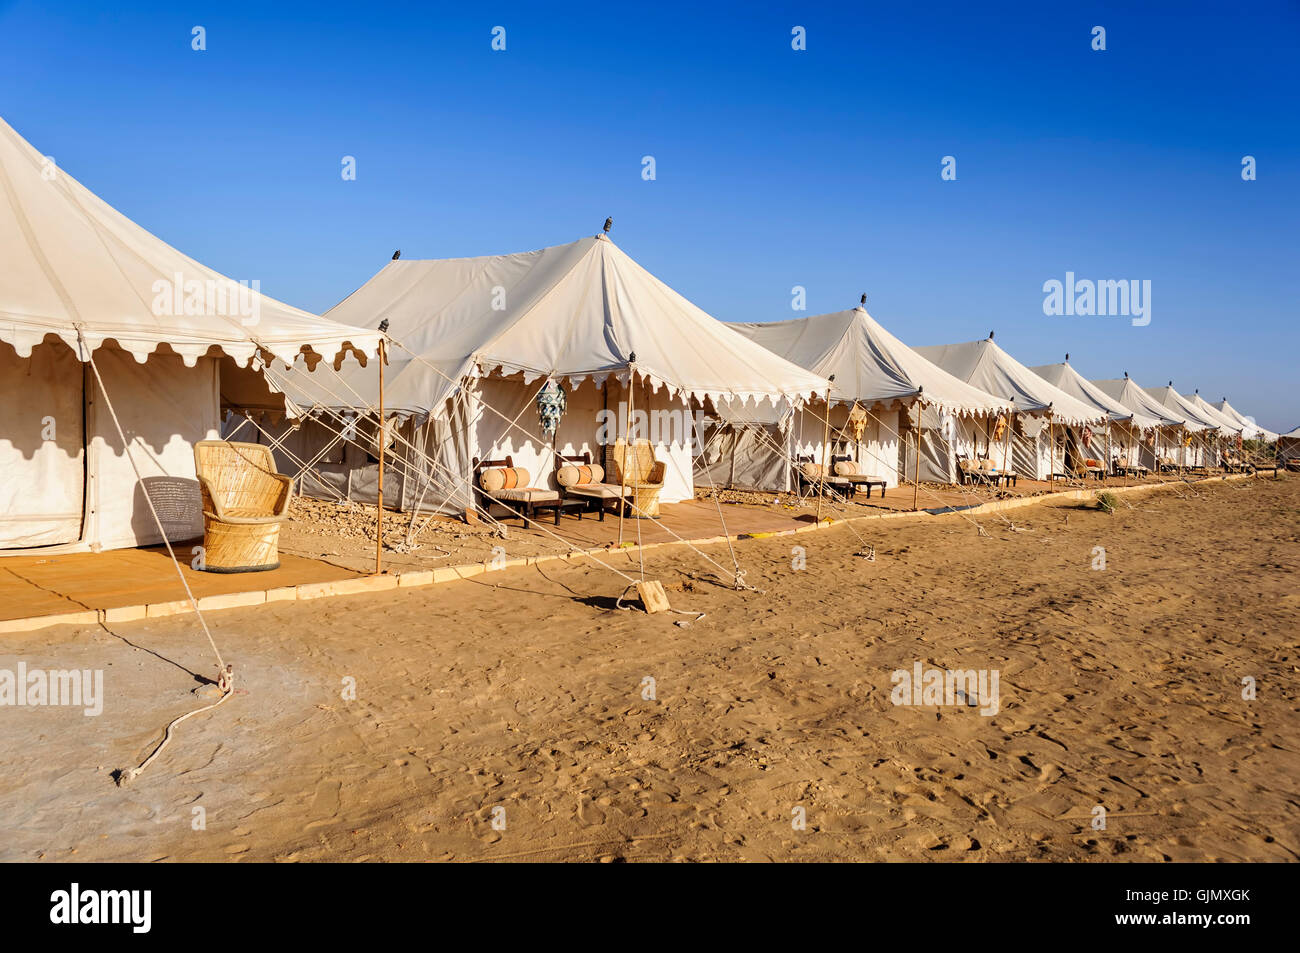 A Desert Camp with white tents and sitting arrangement, in Desert national Park, SAM dunes of Indian Thar Desert, Copy Space Stock Photo